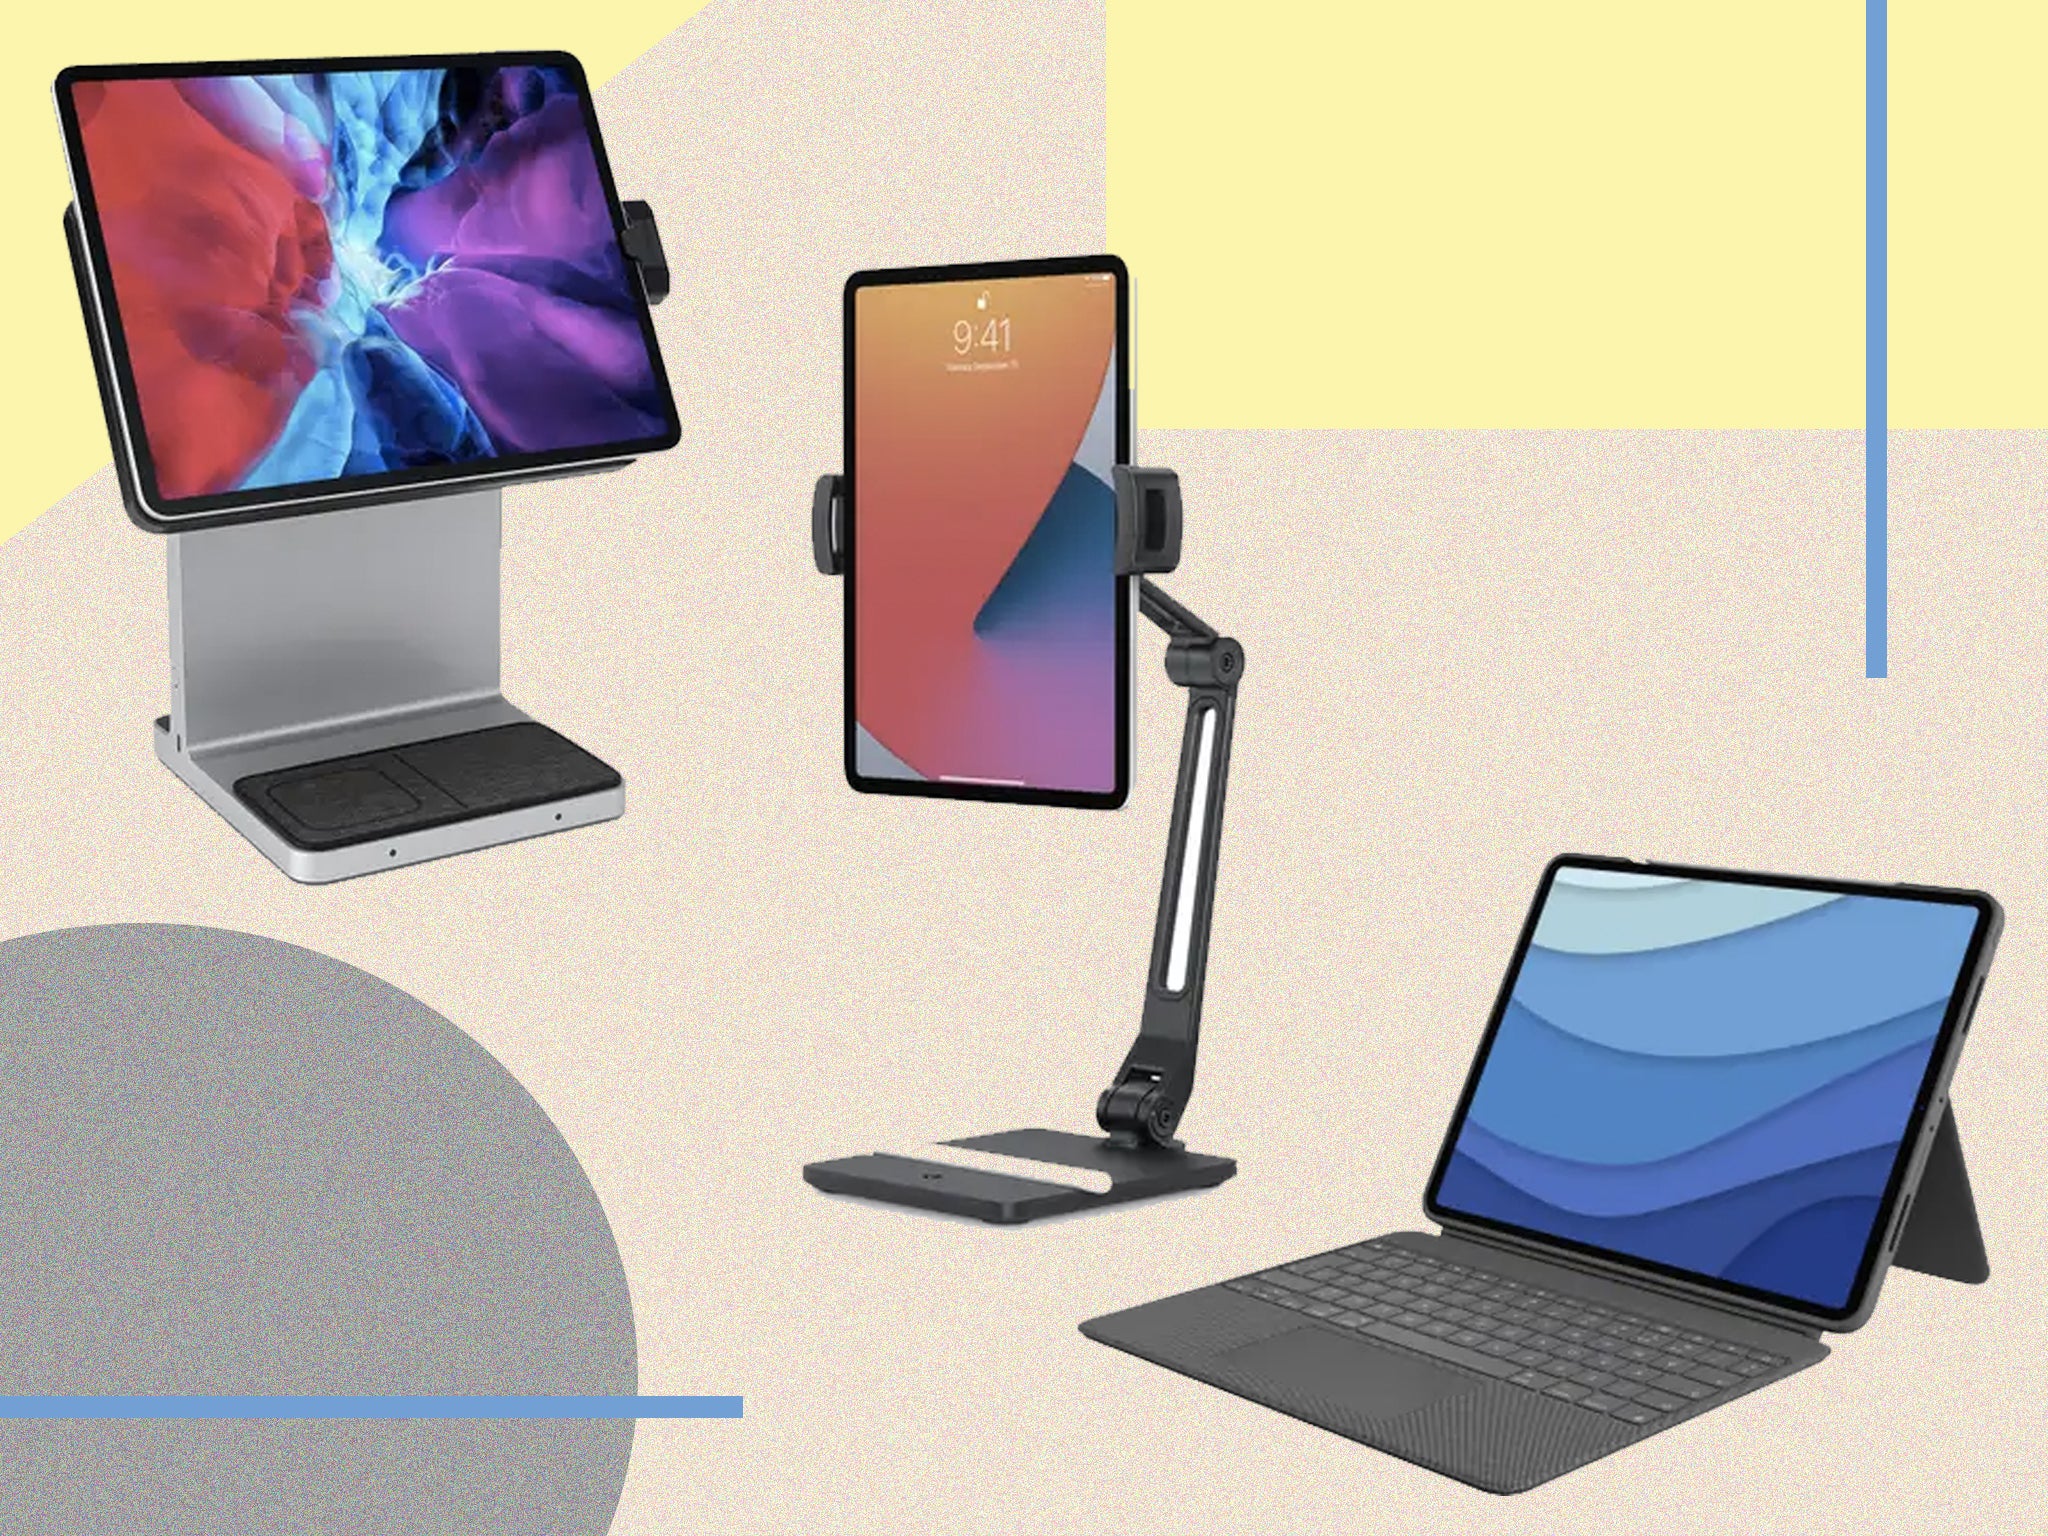 We tested these tablet holders on both our home desk and in our office setup